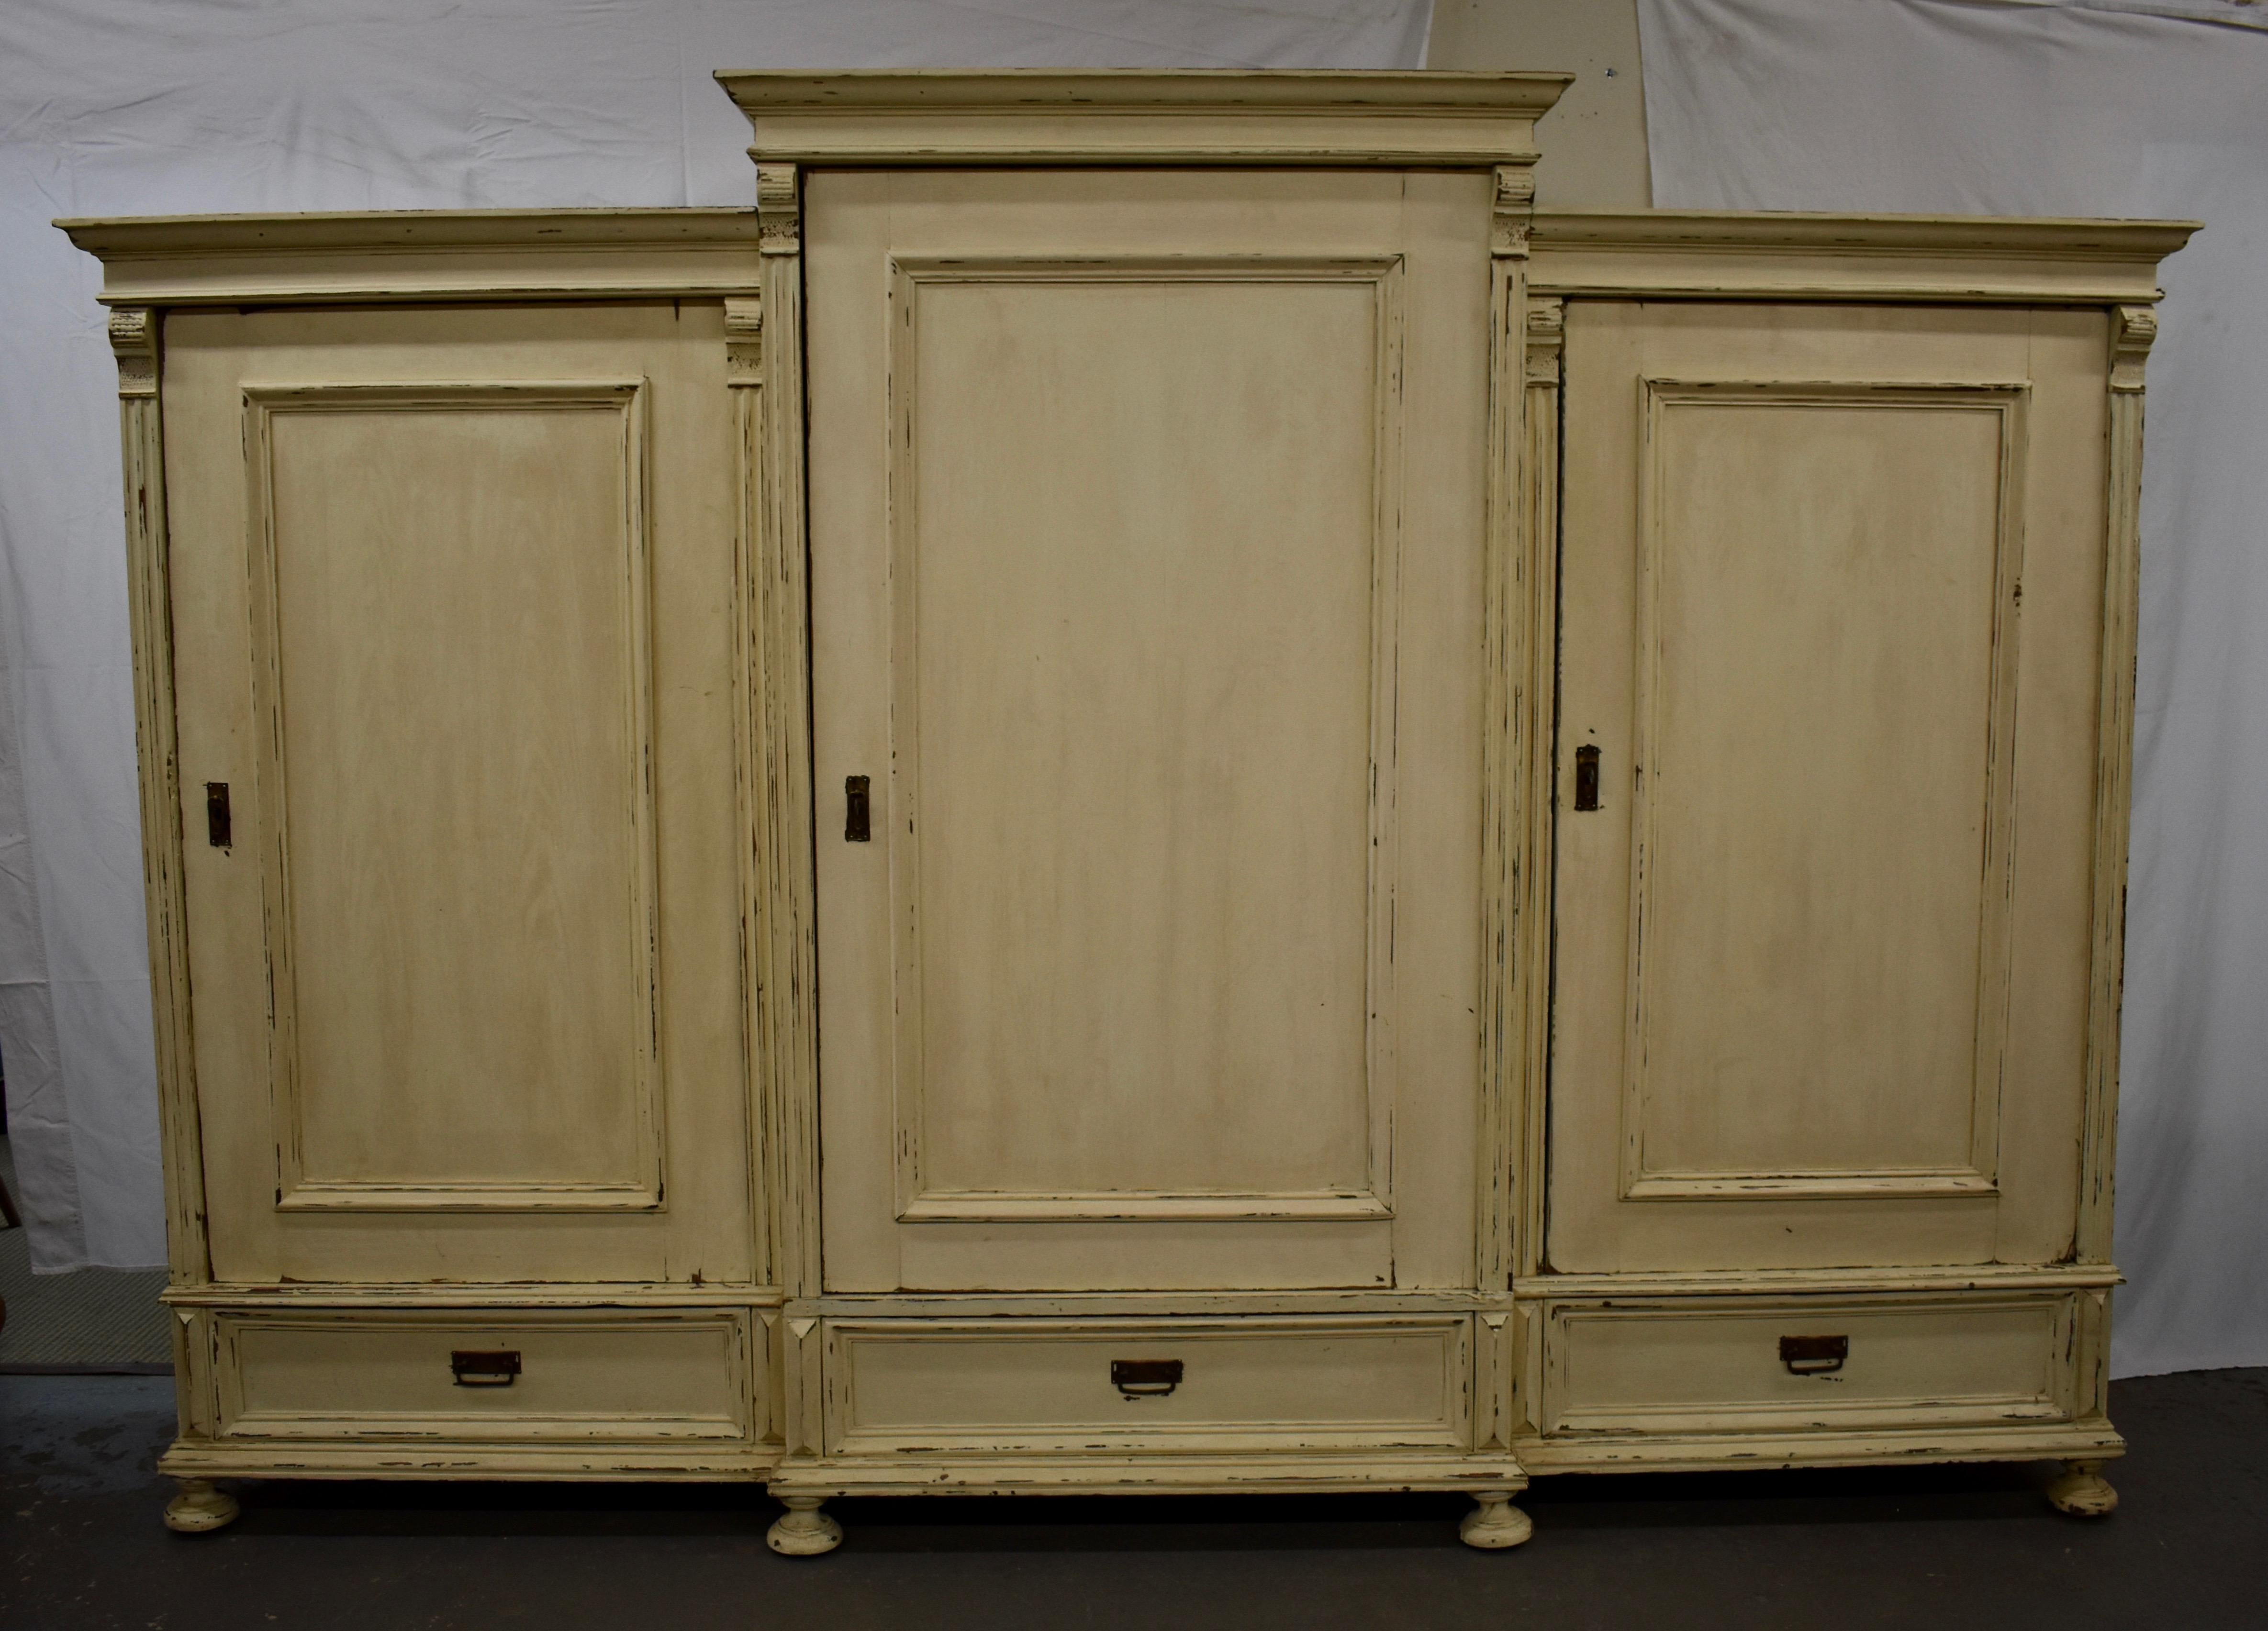 This huge piece is built as three one door armoires, the centre piece being taller and deeper than the sides creating a breakfront with a raised pediment. Each section has a single flat paneled door a deep hand-cut dovetailed drawer and has fluting